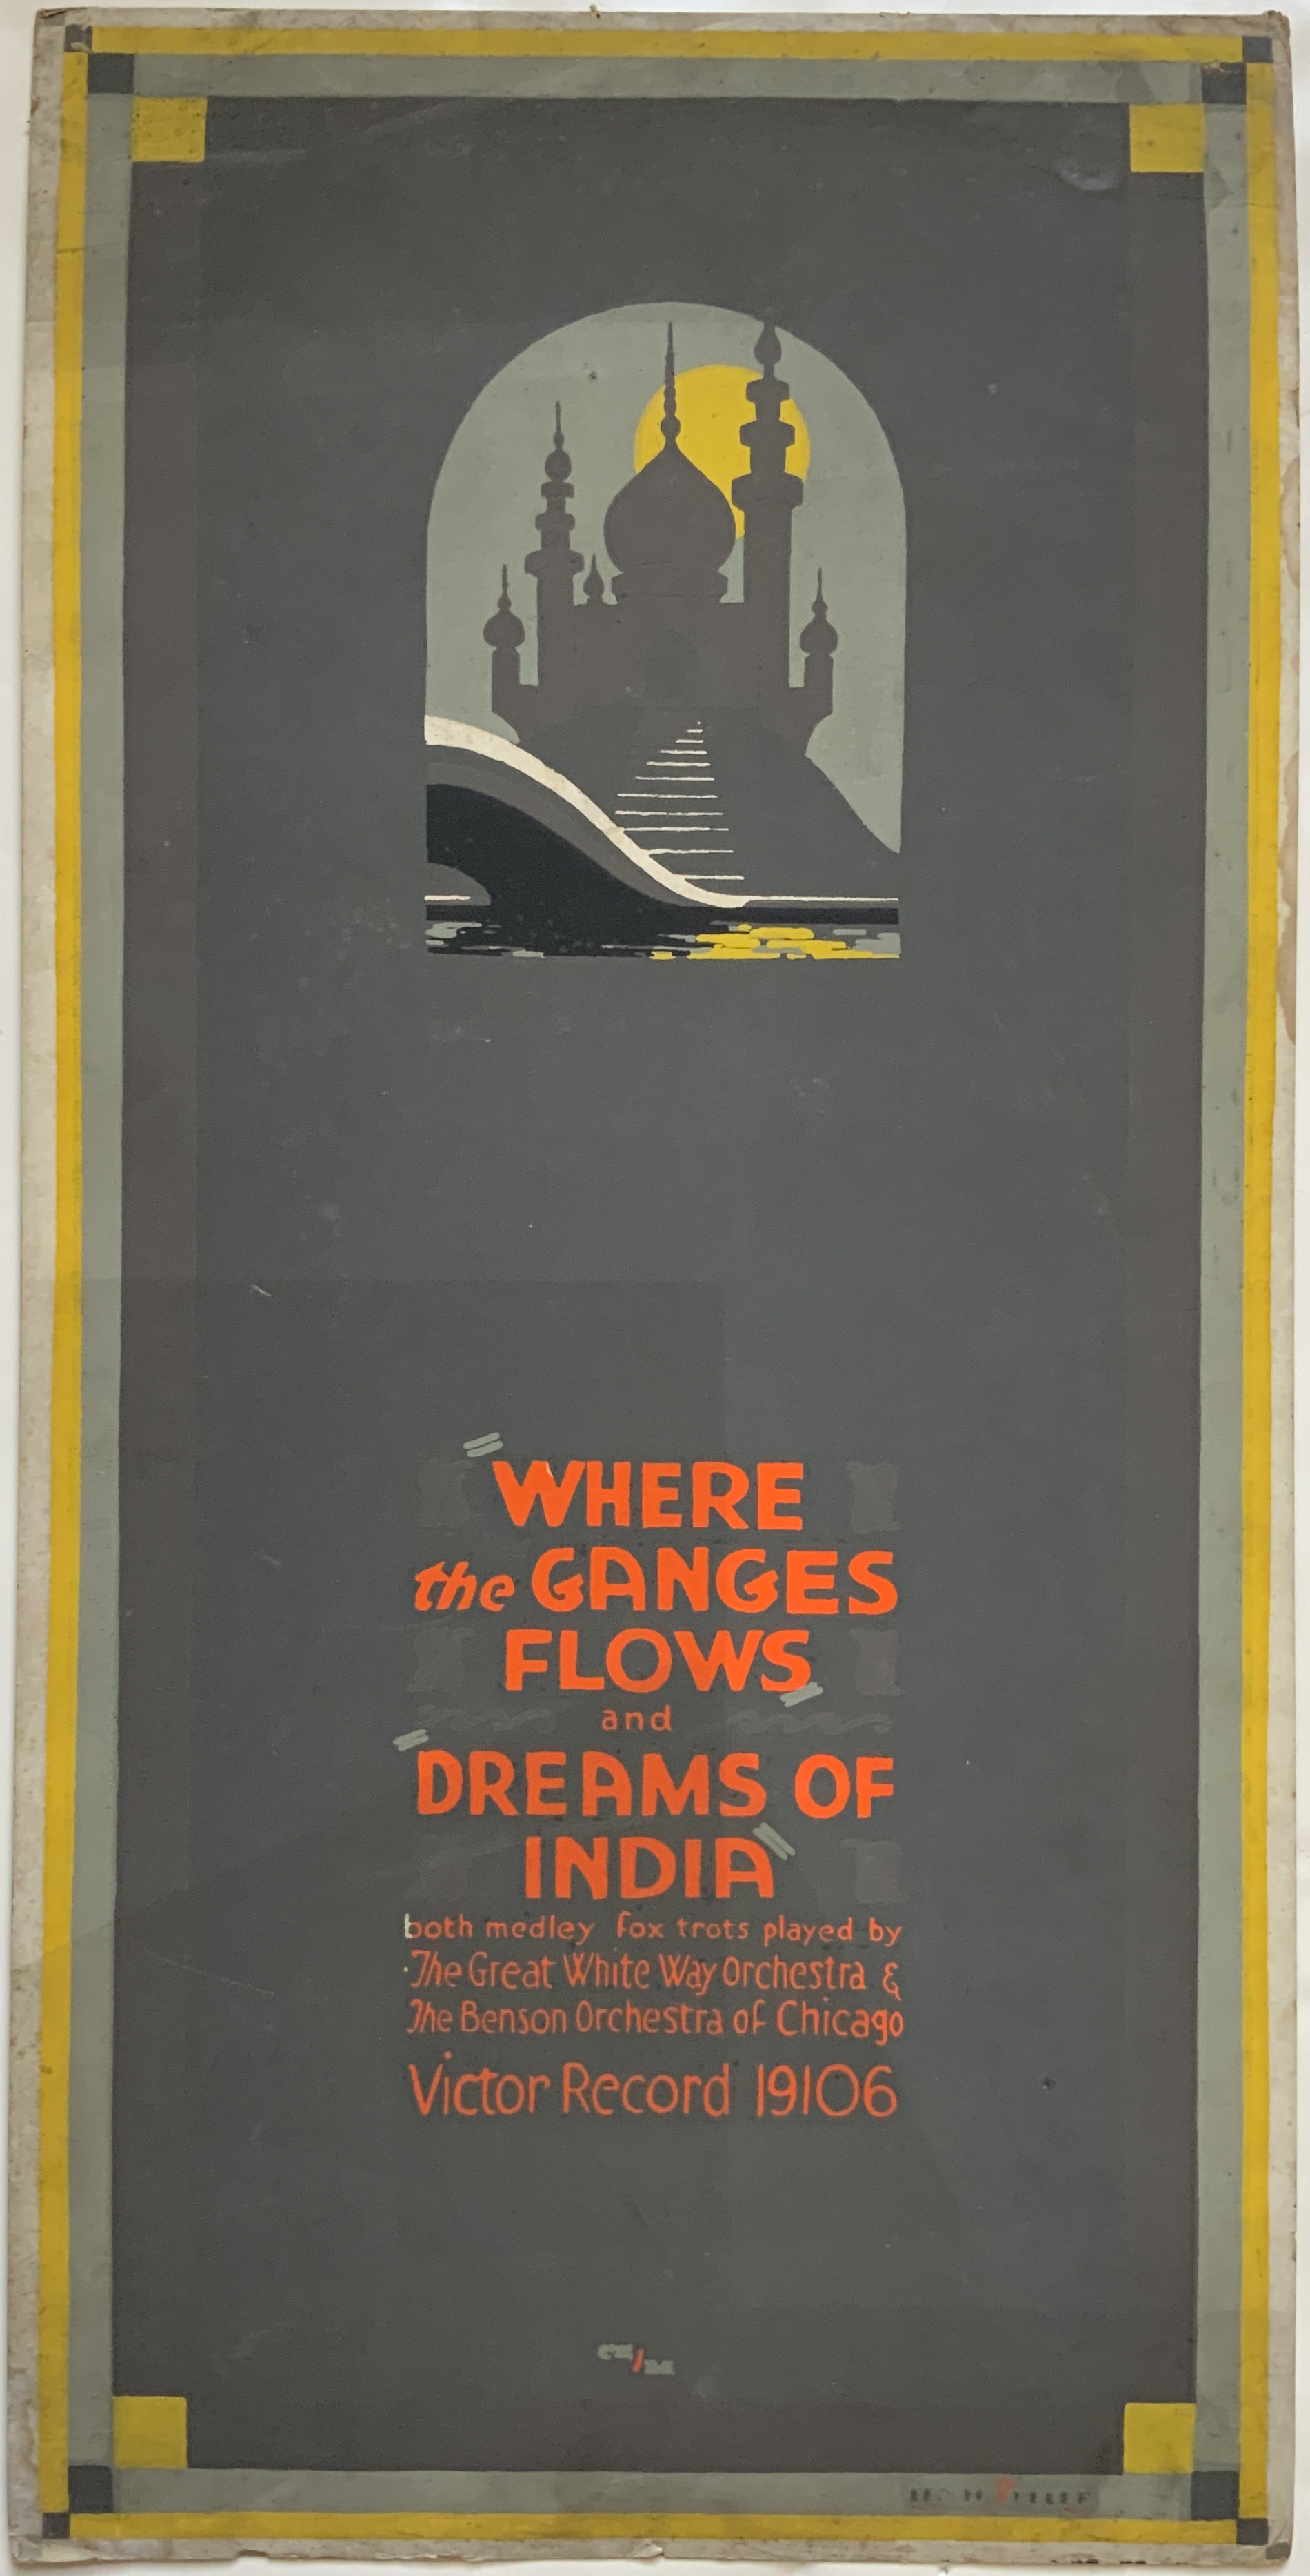 M41	VICTOR RECORDS ORIGINAL POSTER ART - “WHERE THE GANGES FLOWS AND DREAMS OF INDIA”